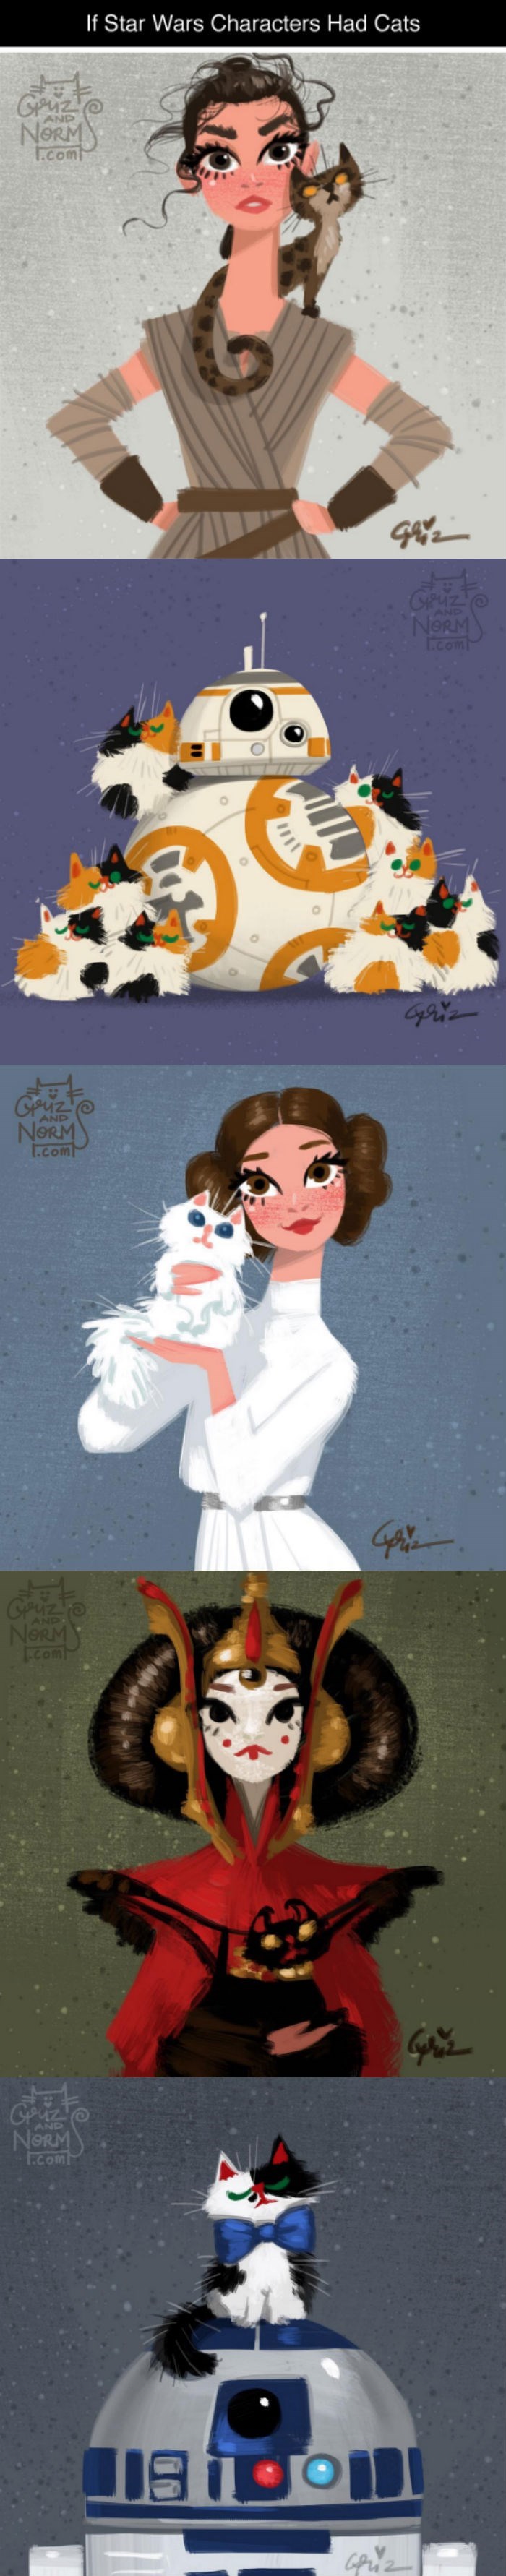 Illustrations of If Star Wars Characters Had Cats